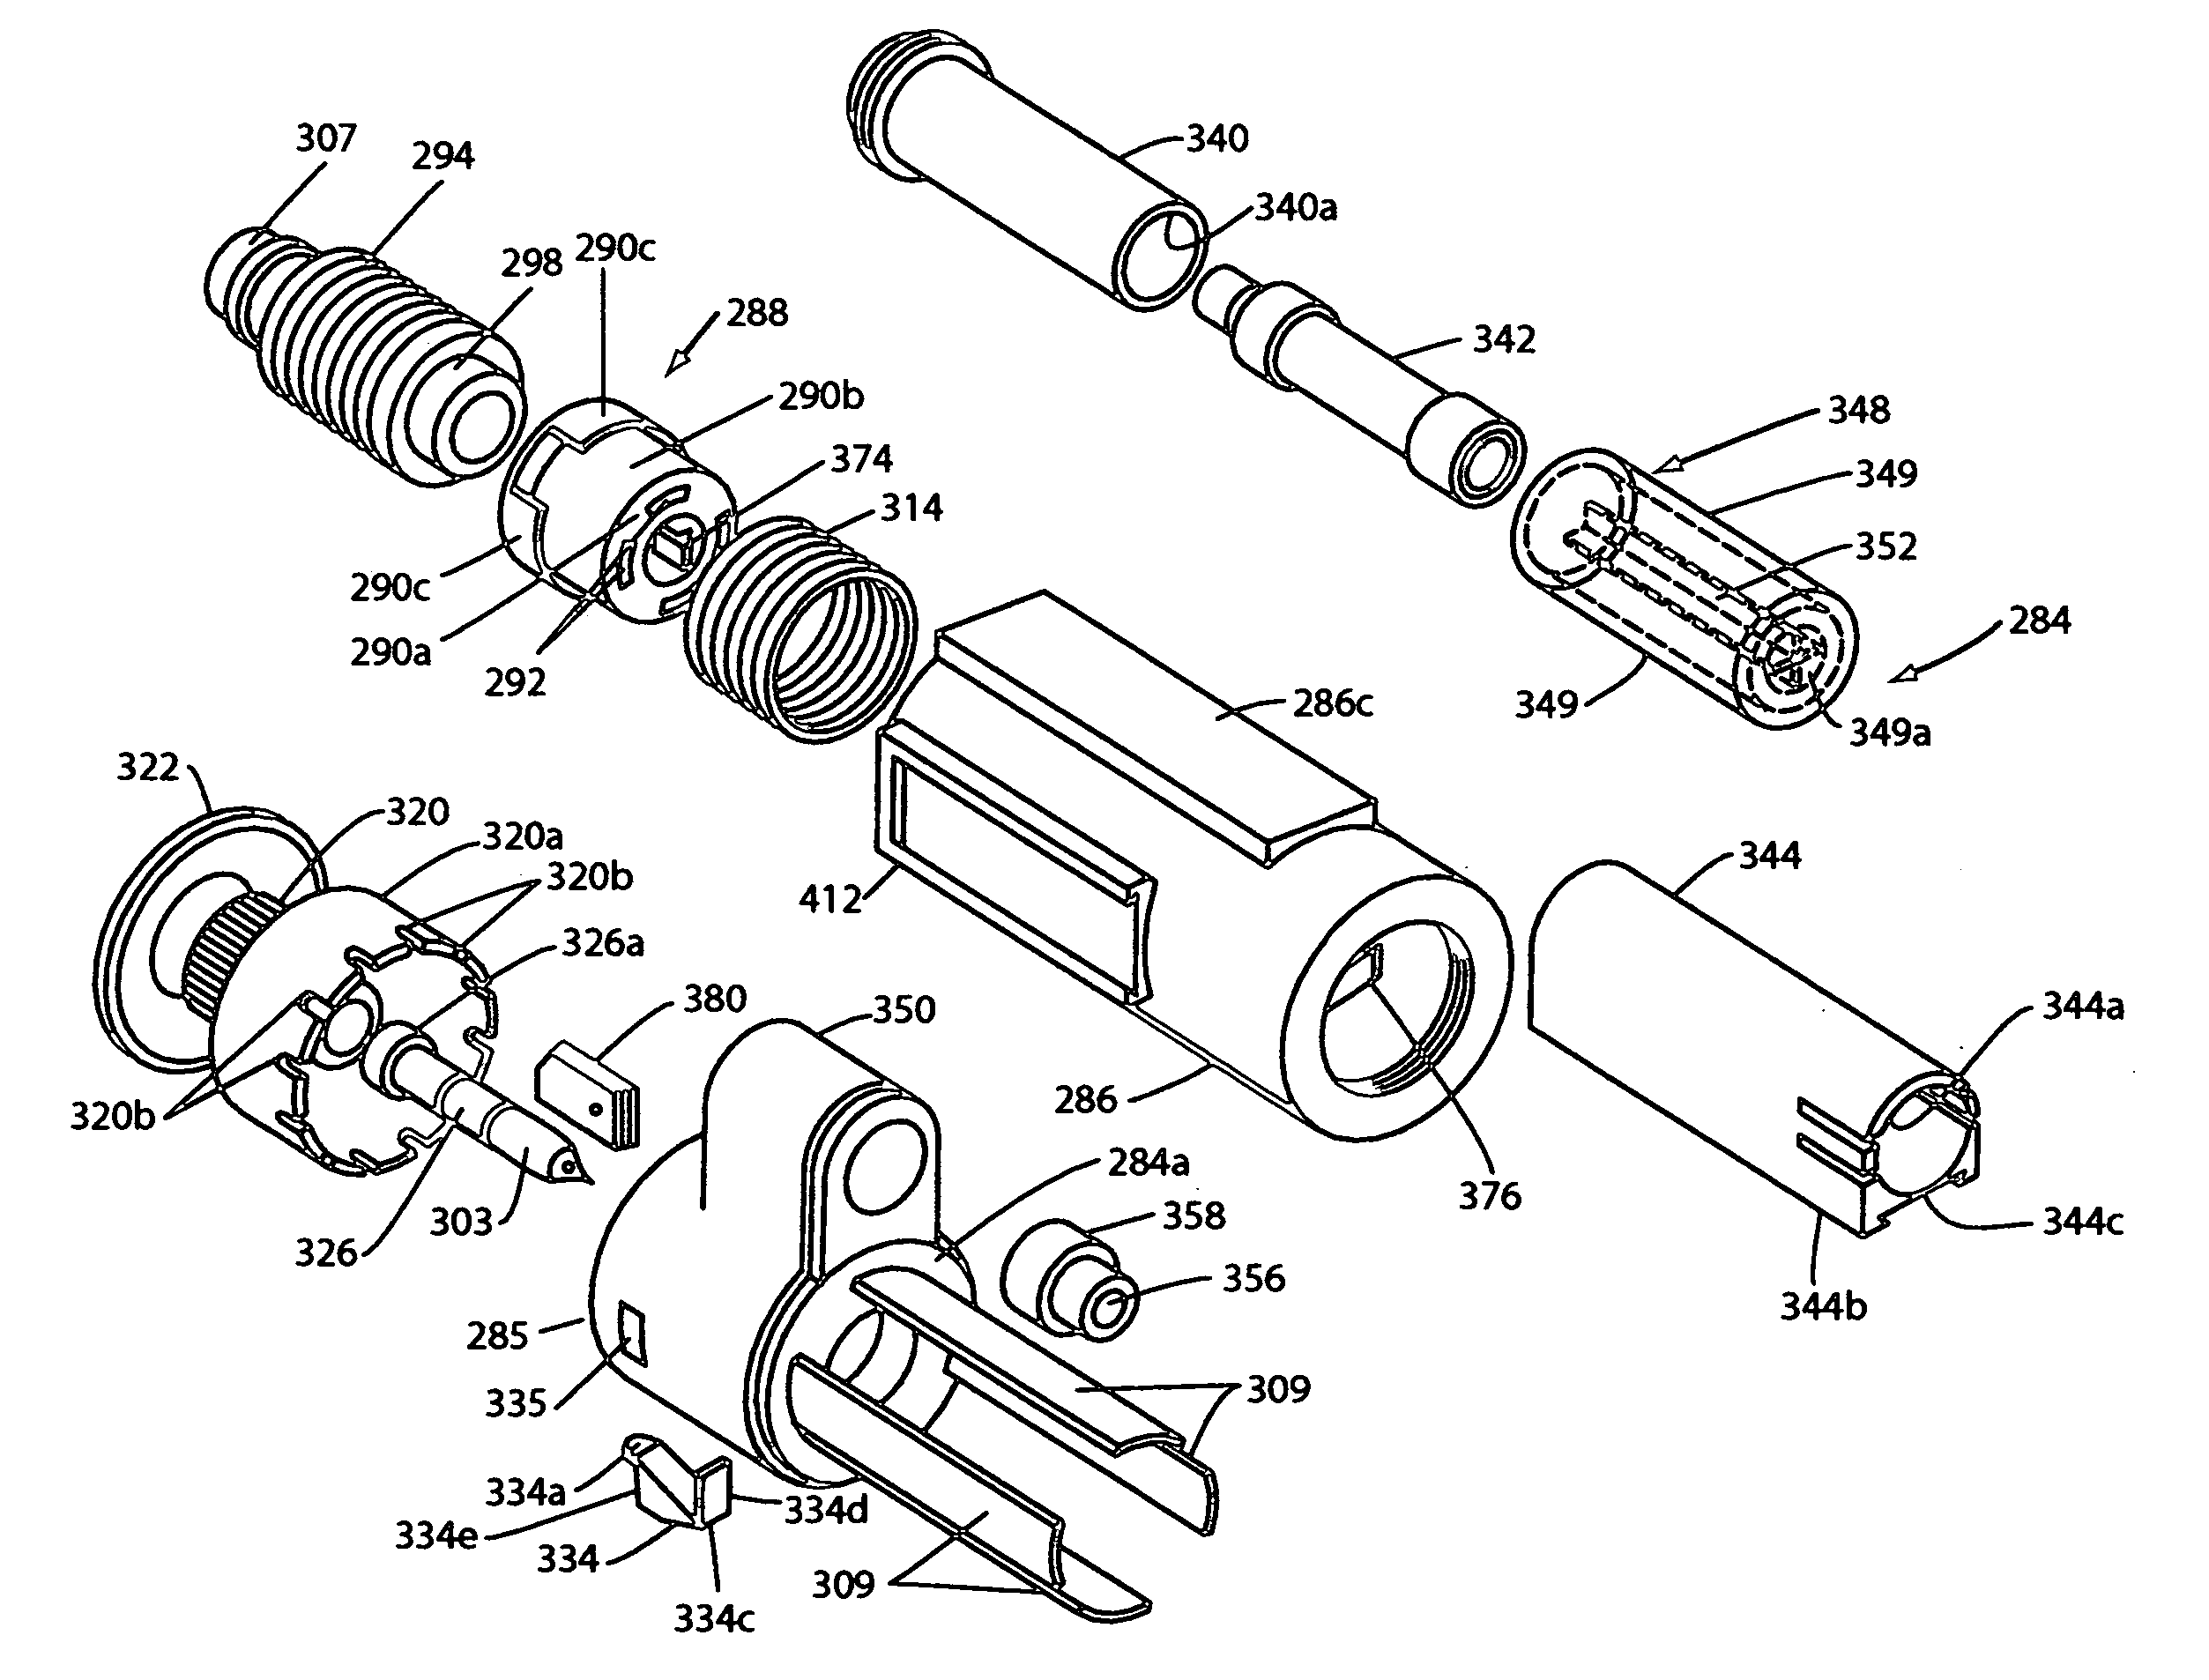 Fluid dispenser with additive sub-system